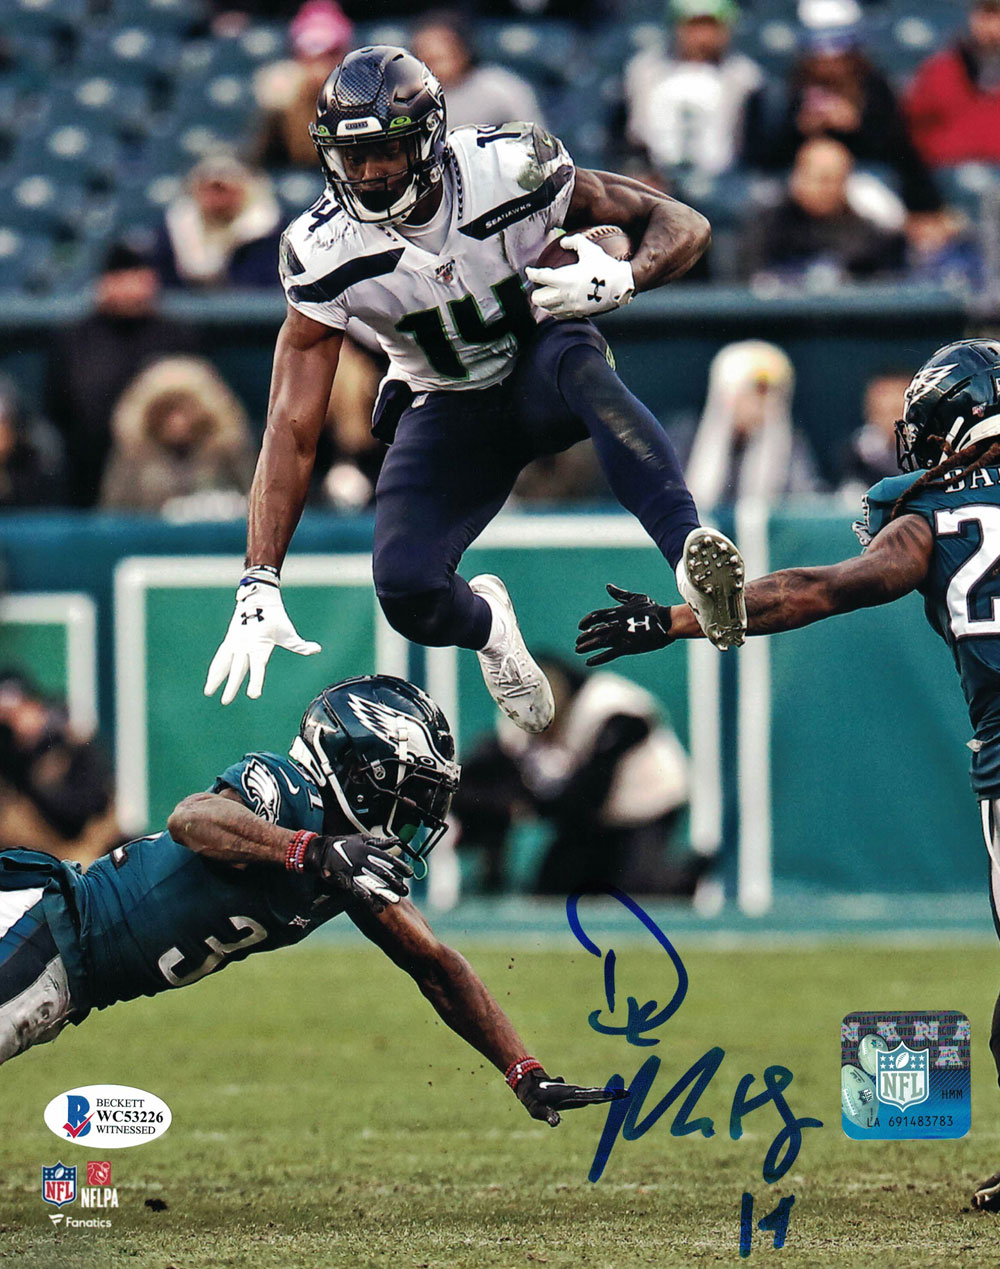 DK Metcalf Autographed/Signed Seattle Seahawks 8x10 Photo BAS 28403 PF